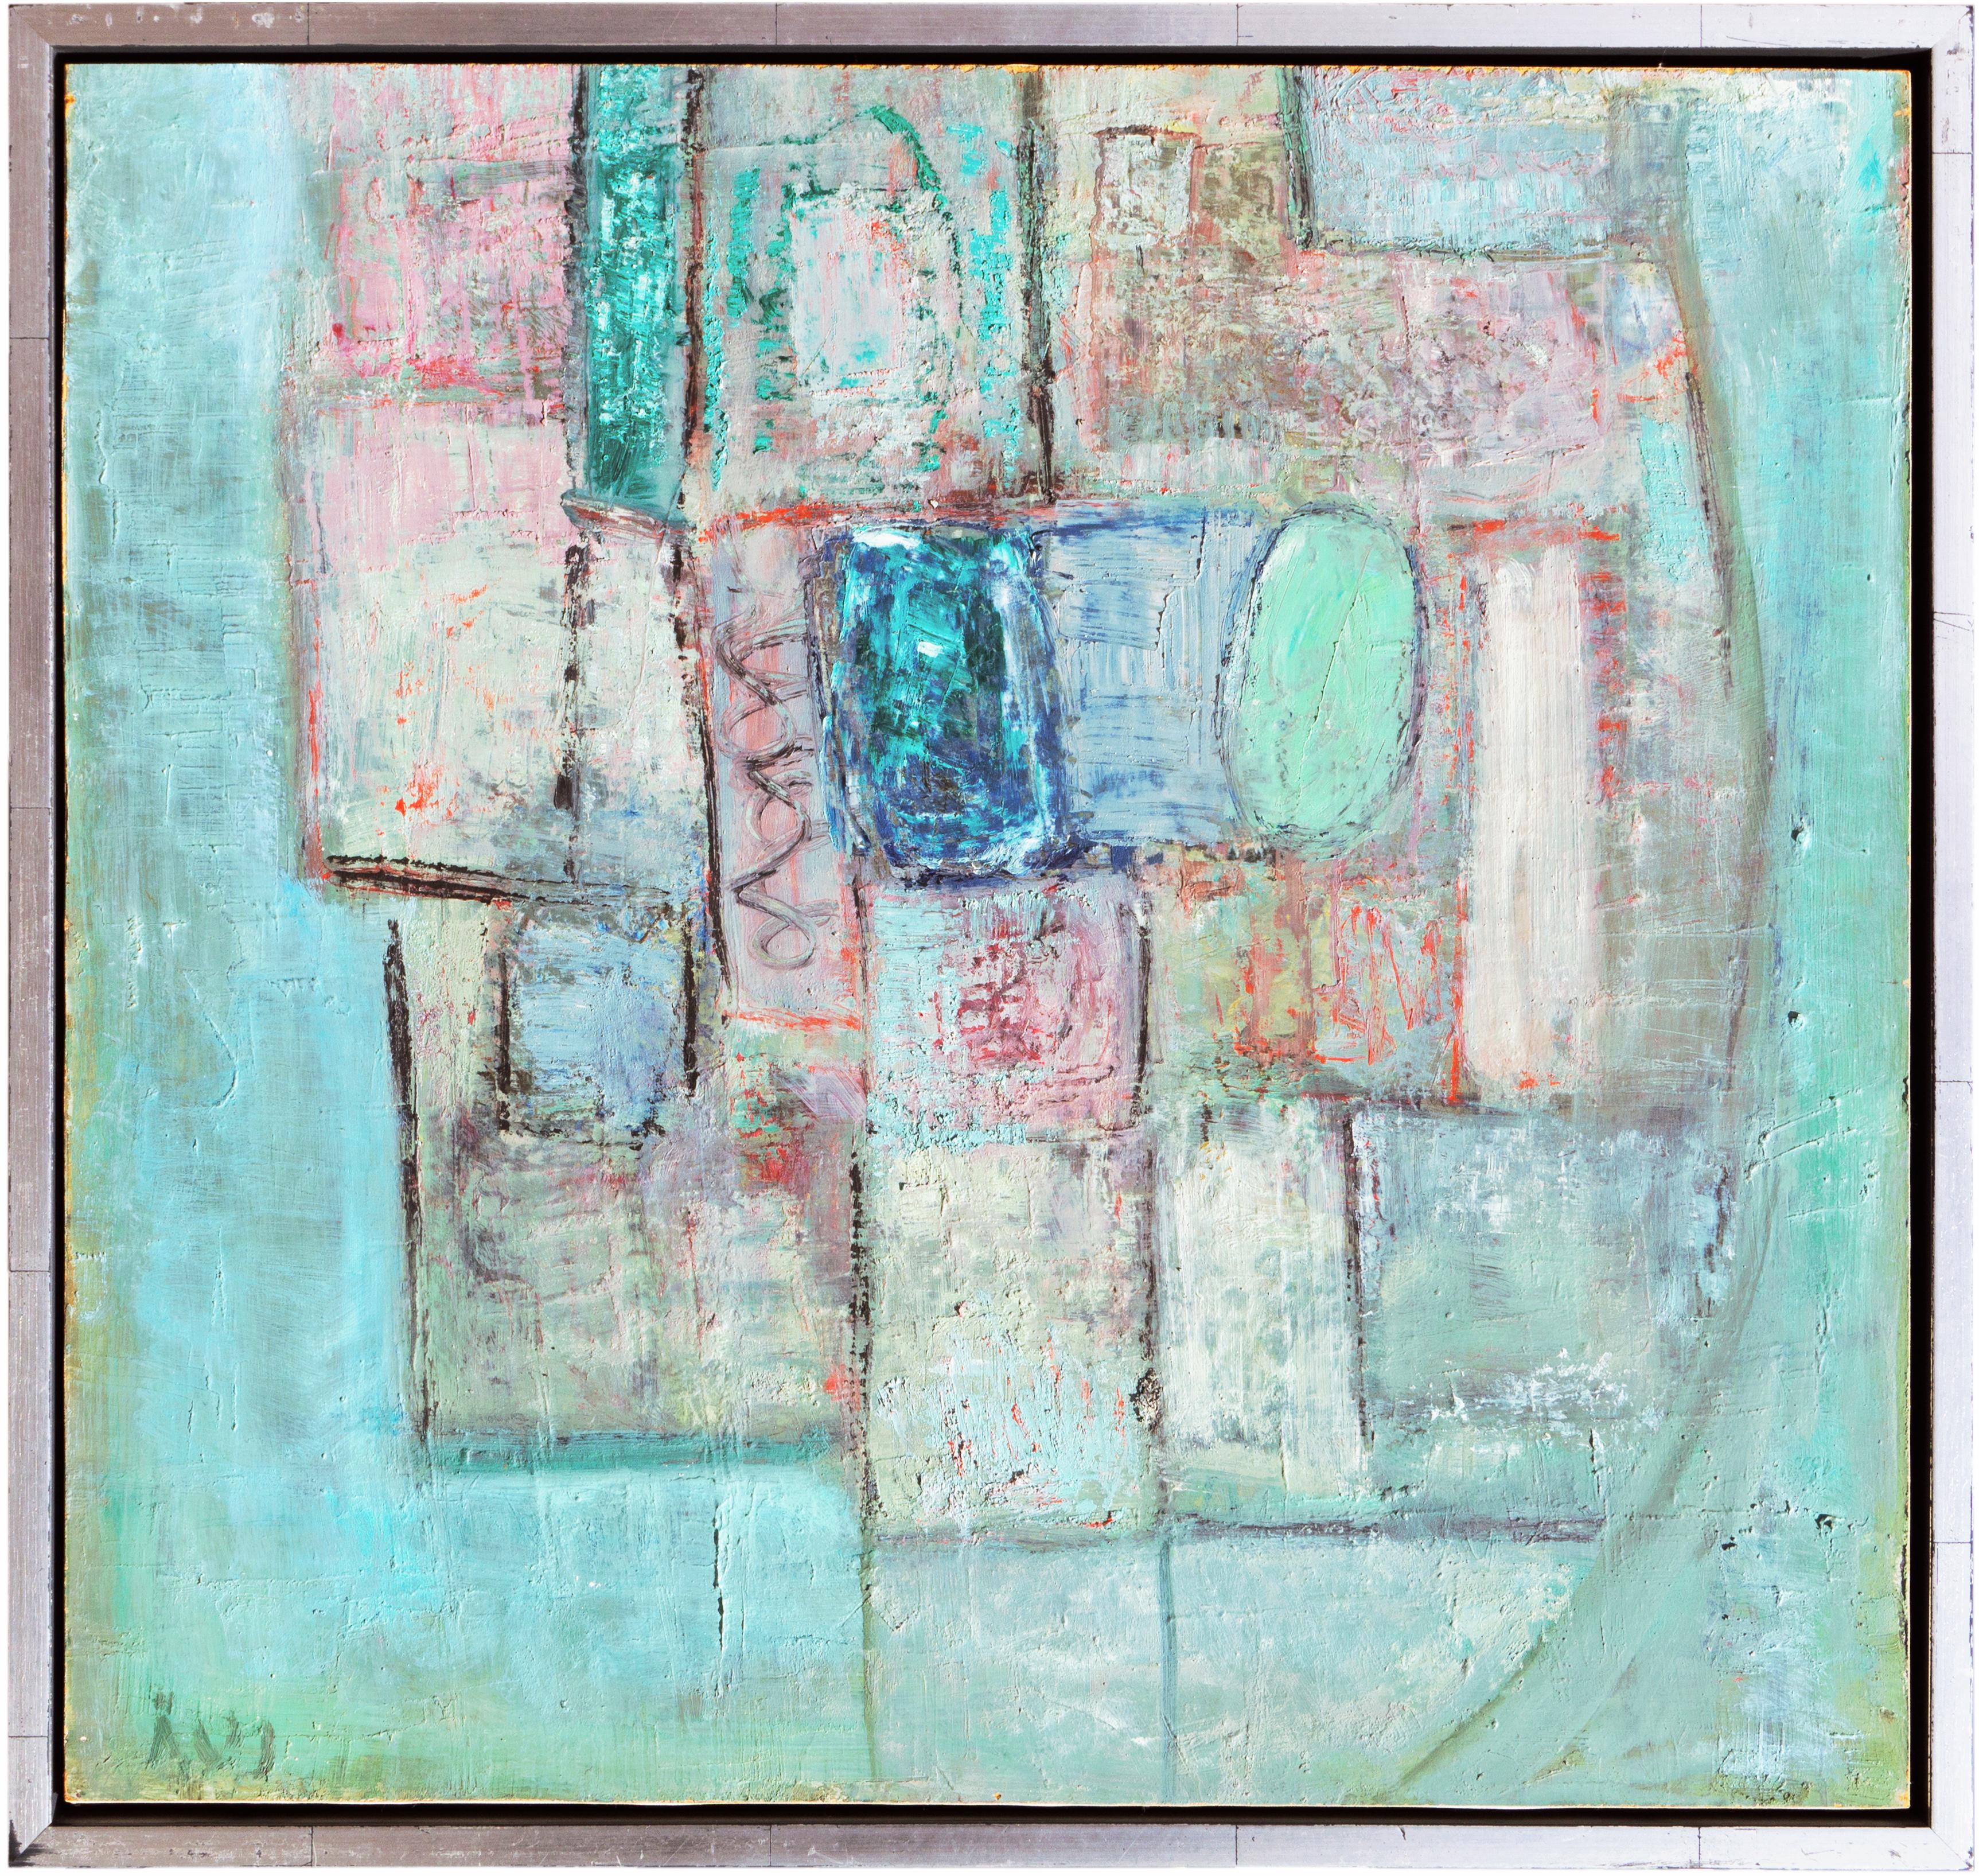 'Abstract, Turquoise and Rose', Paris Modernist, Guggenheim, Benezit, Italy - Painting by Aage Vogel-Jorgensen